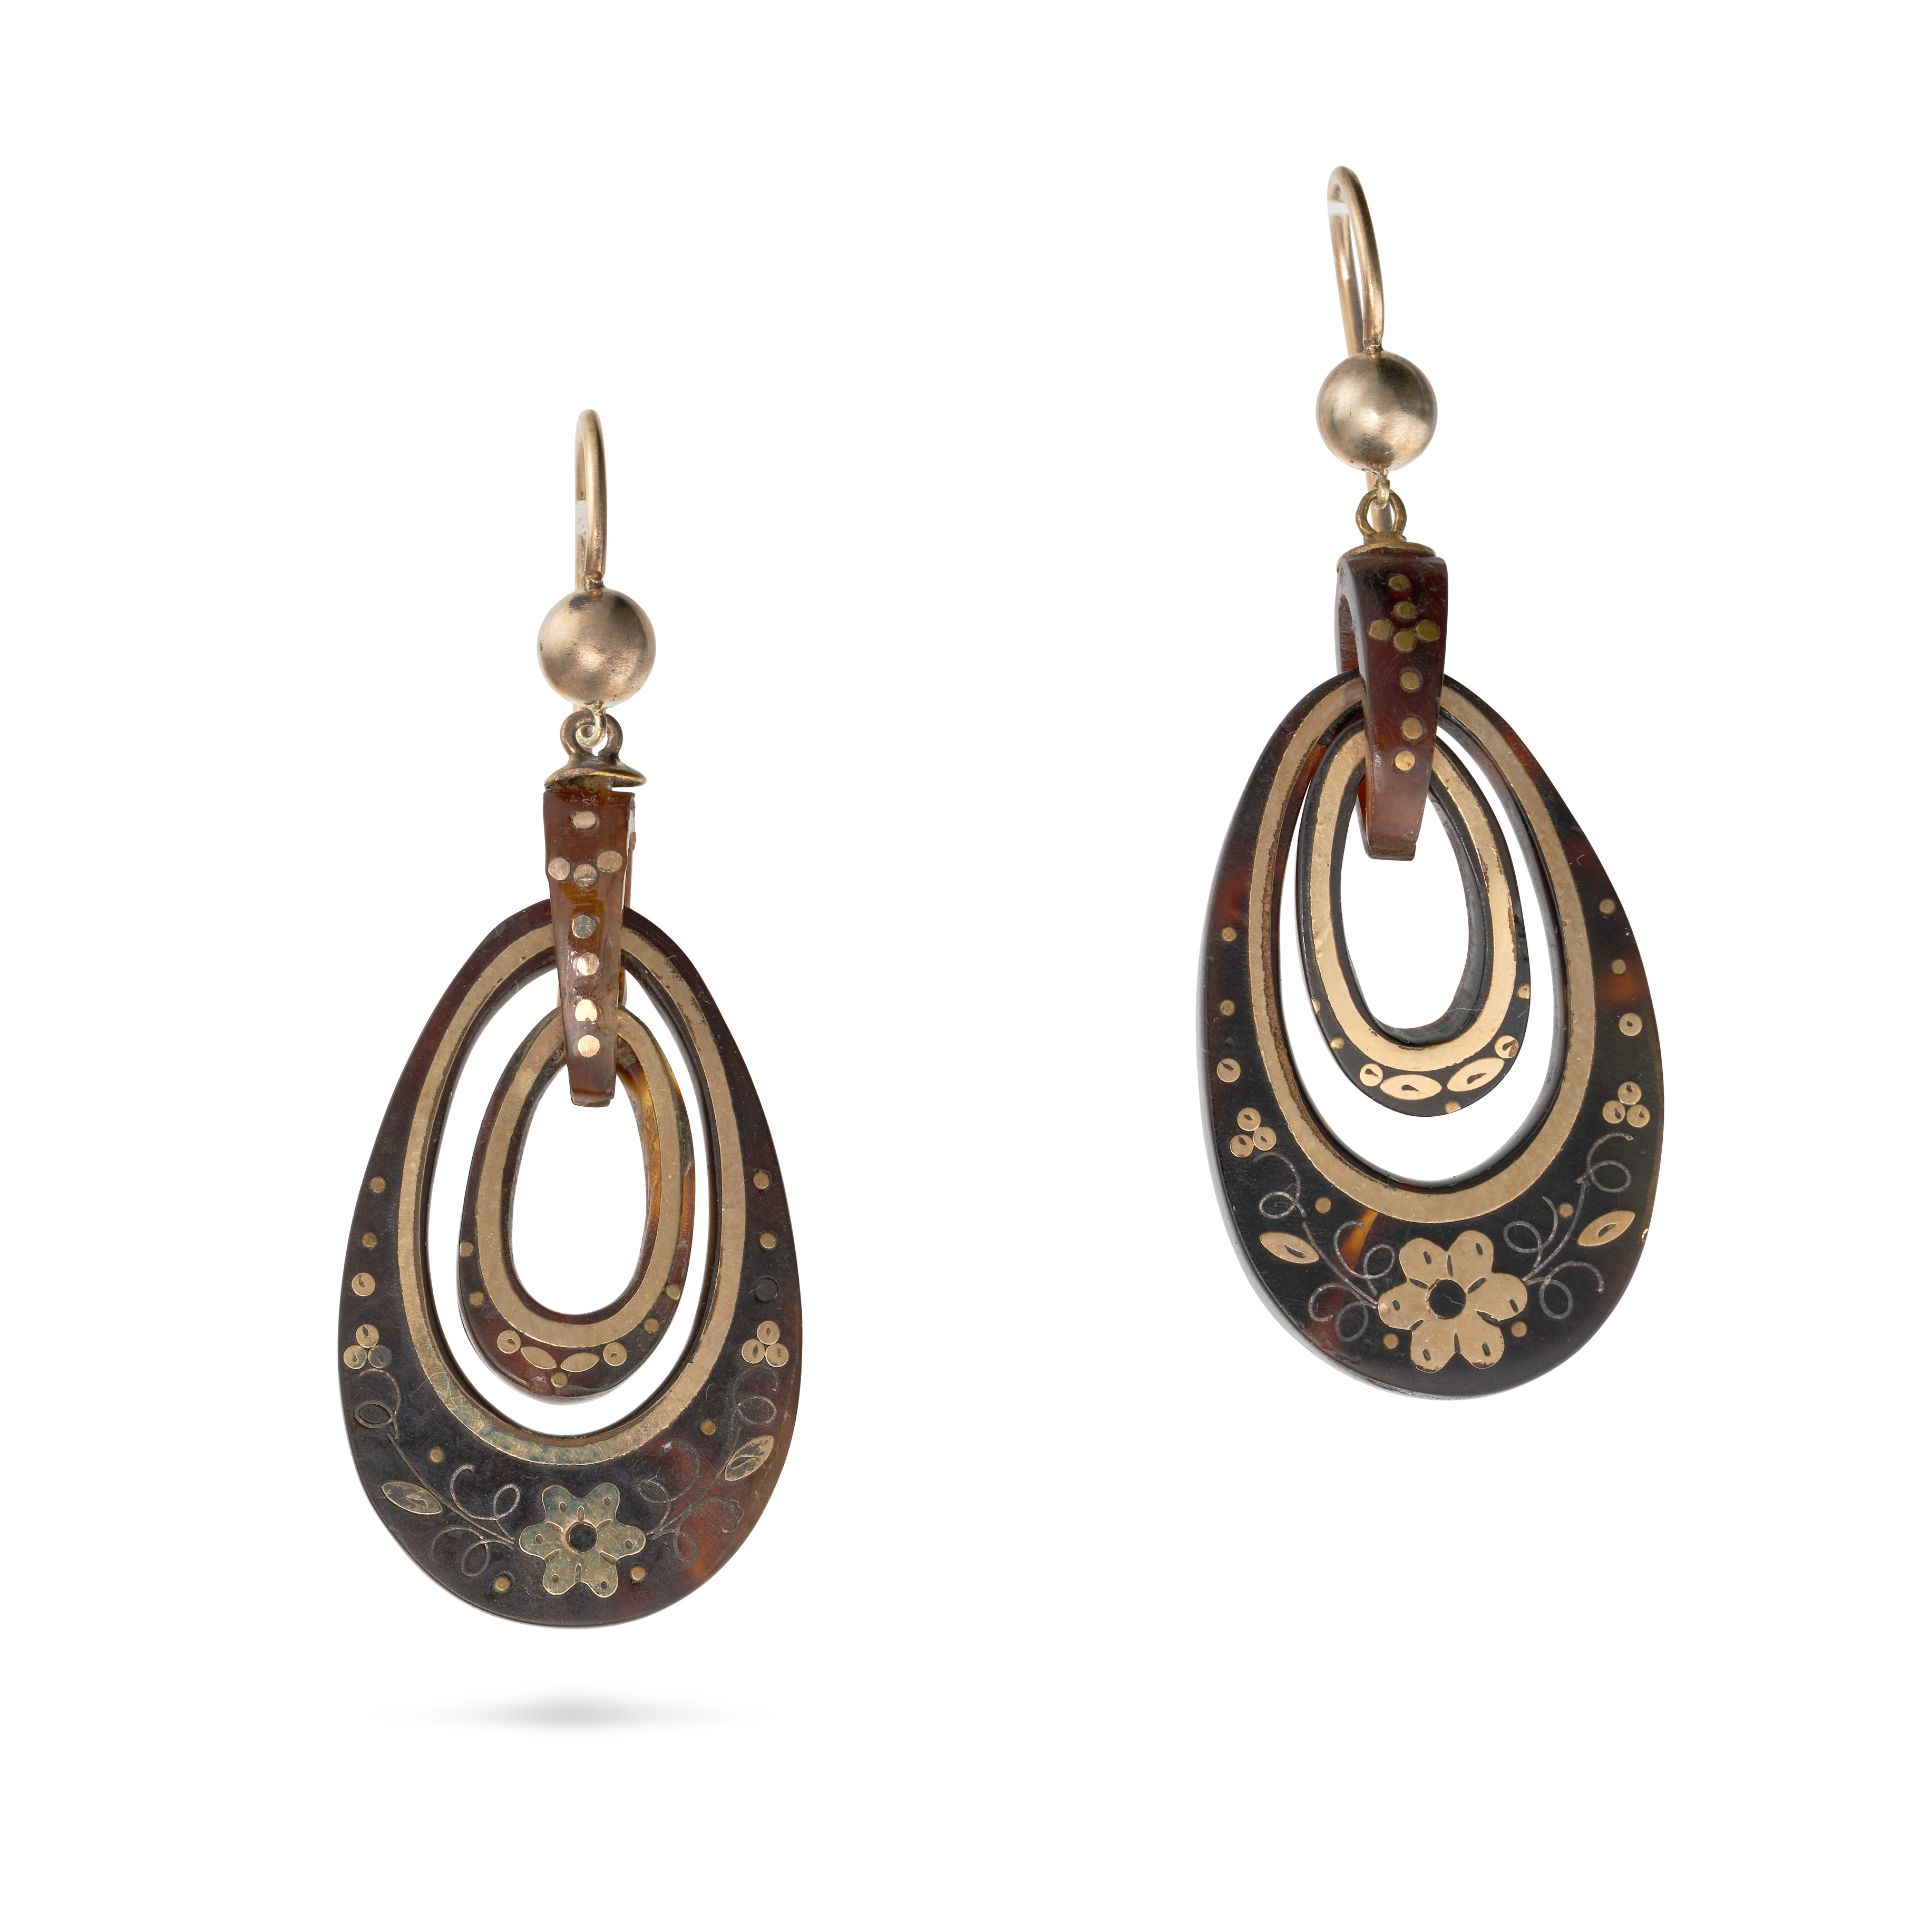 A PAIR OF ANTIQUE PIQUE TORTOISESHELL EARRINGS each suspending two tortoiseshell hoops inlaid wit...